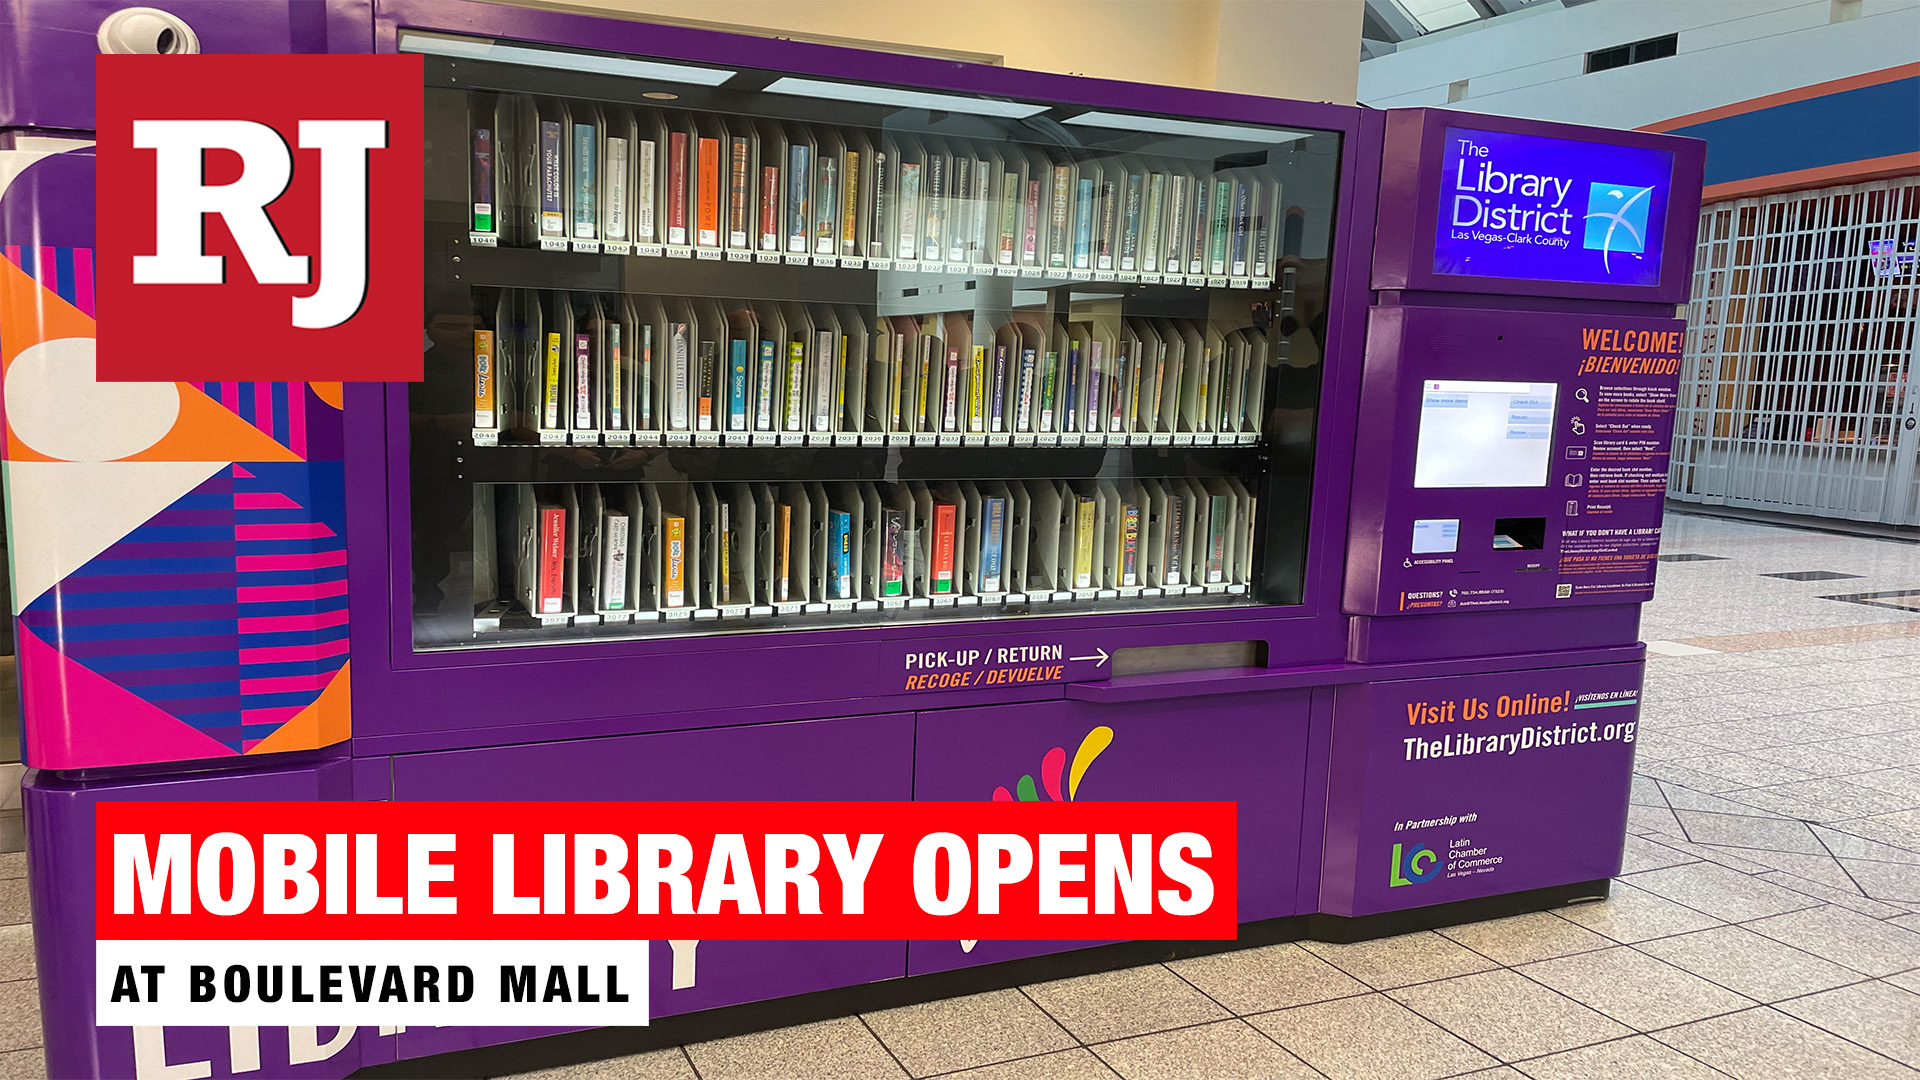 Mobile Library opening at Boulevard Mall